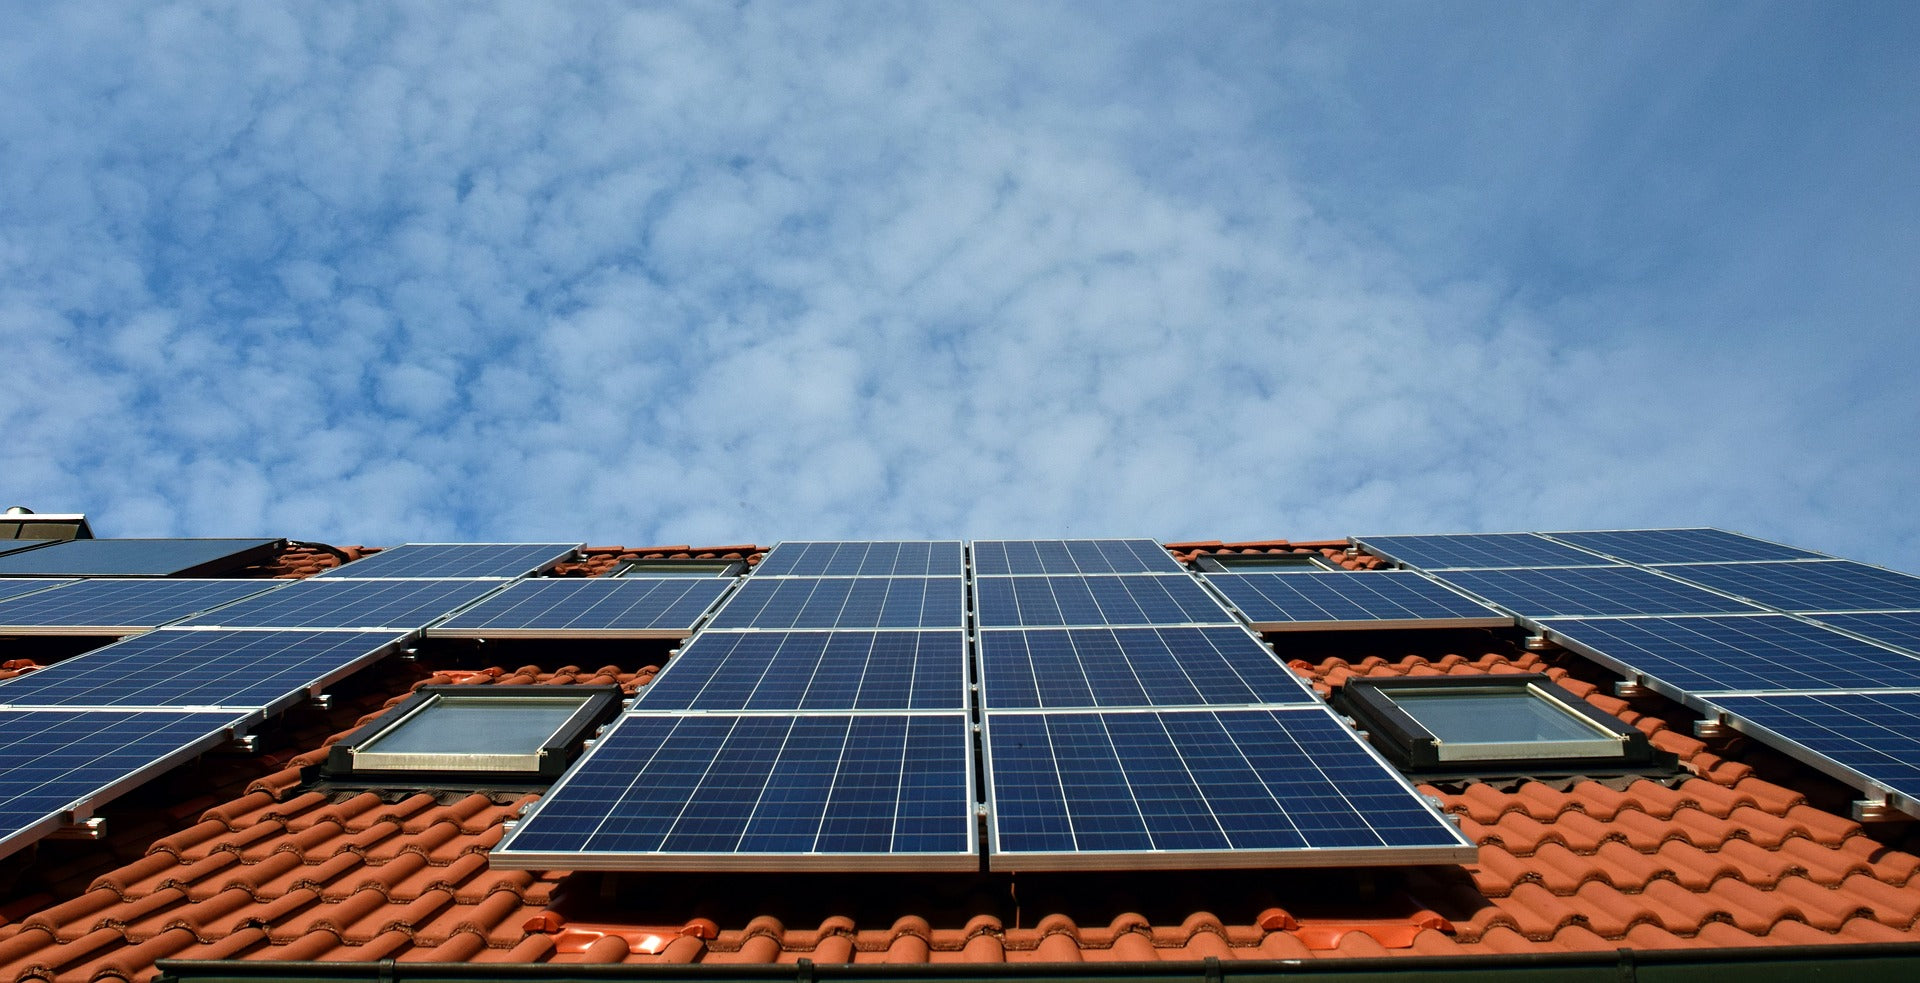 Examples of residential solar panel installation